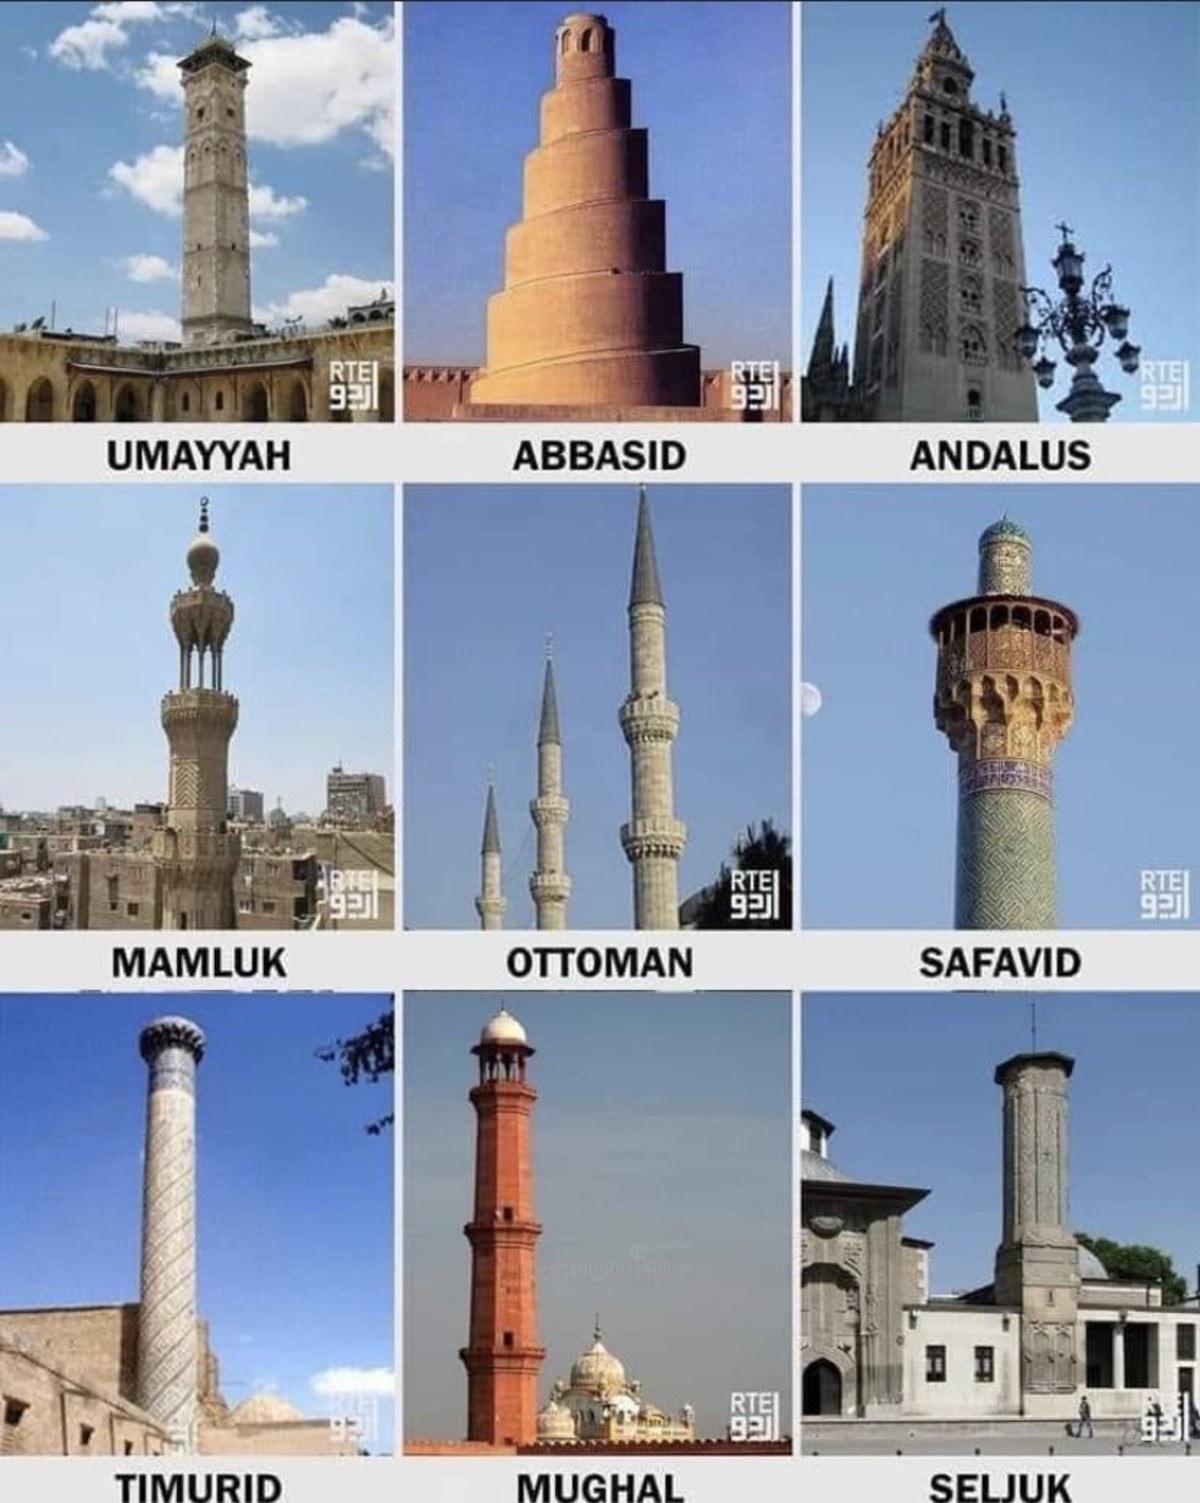 Minarets. .. What a nice collection of noise towers.